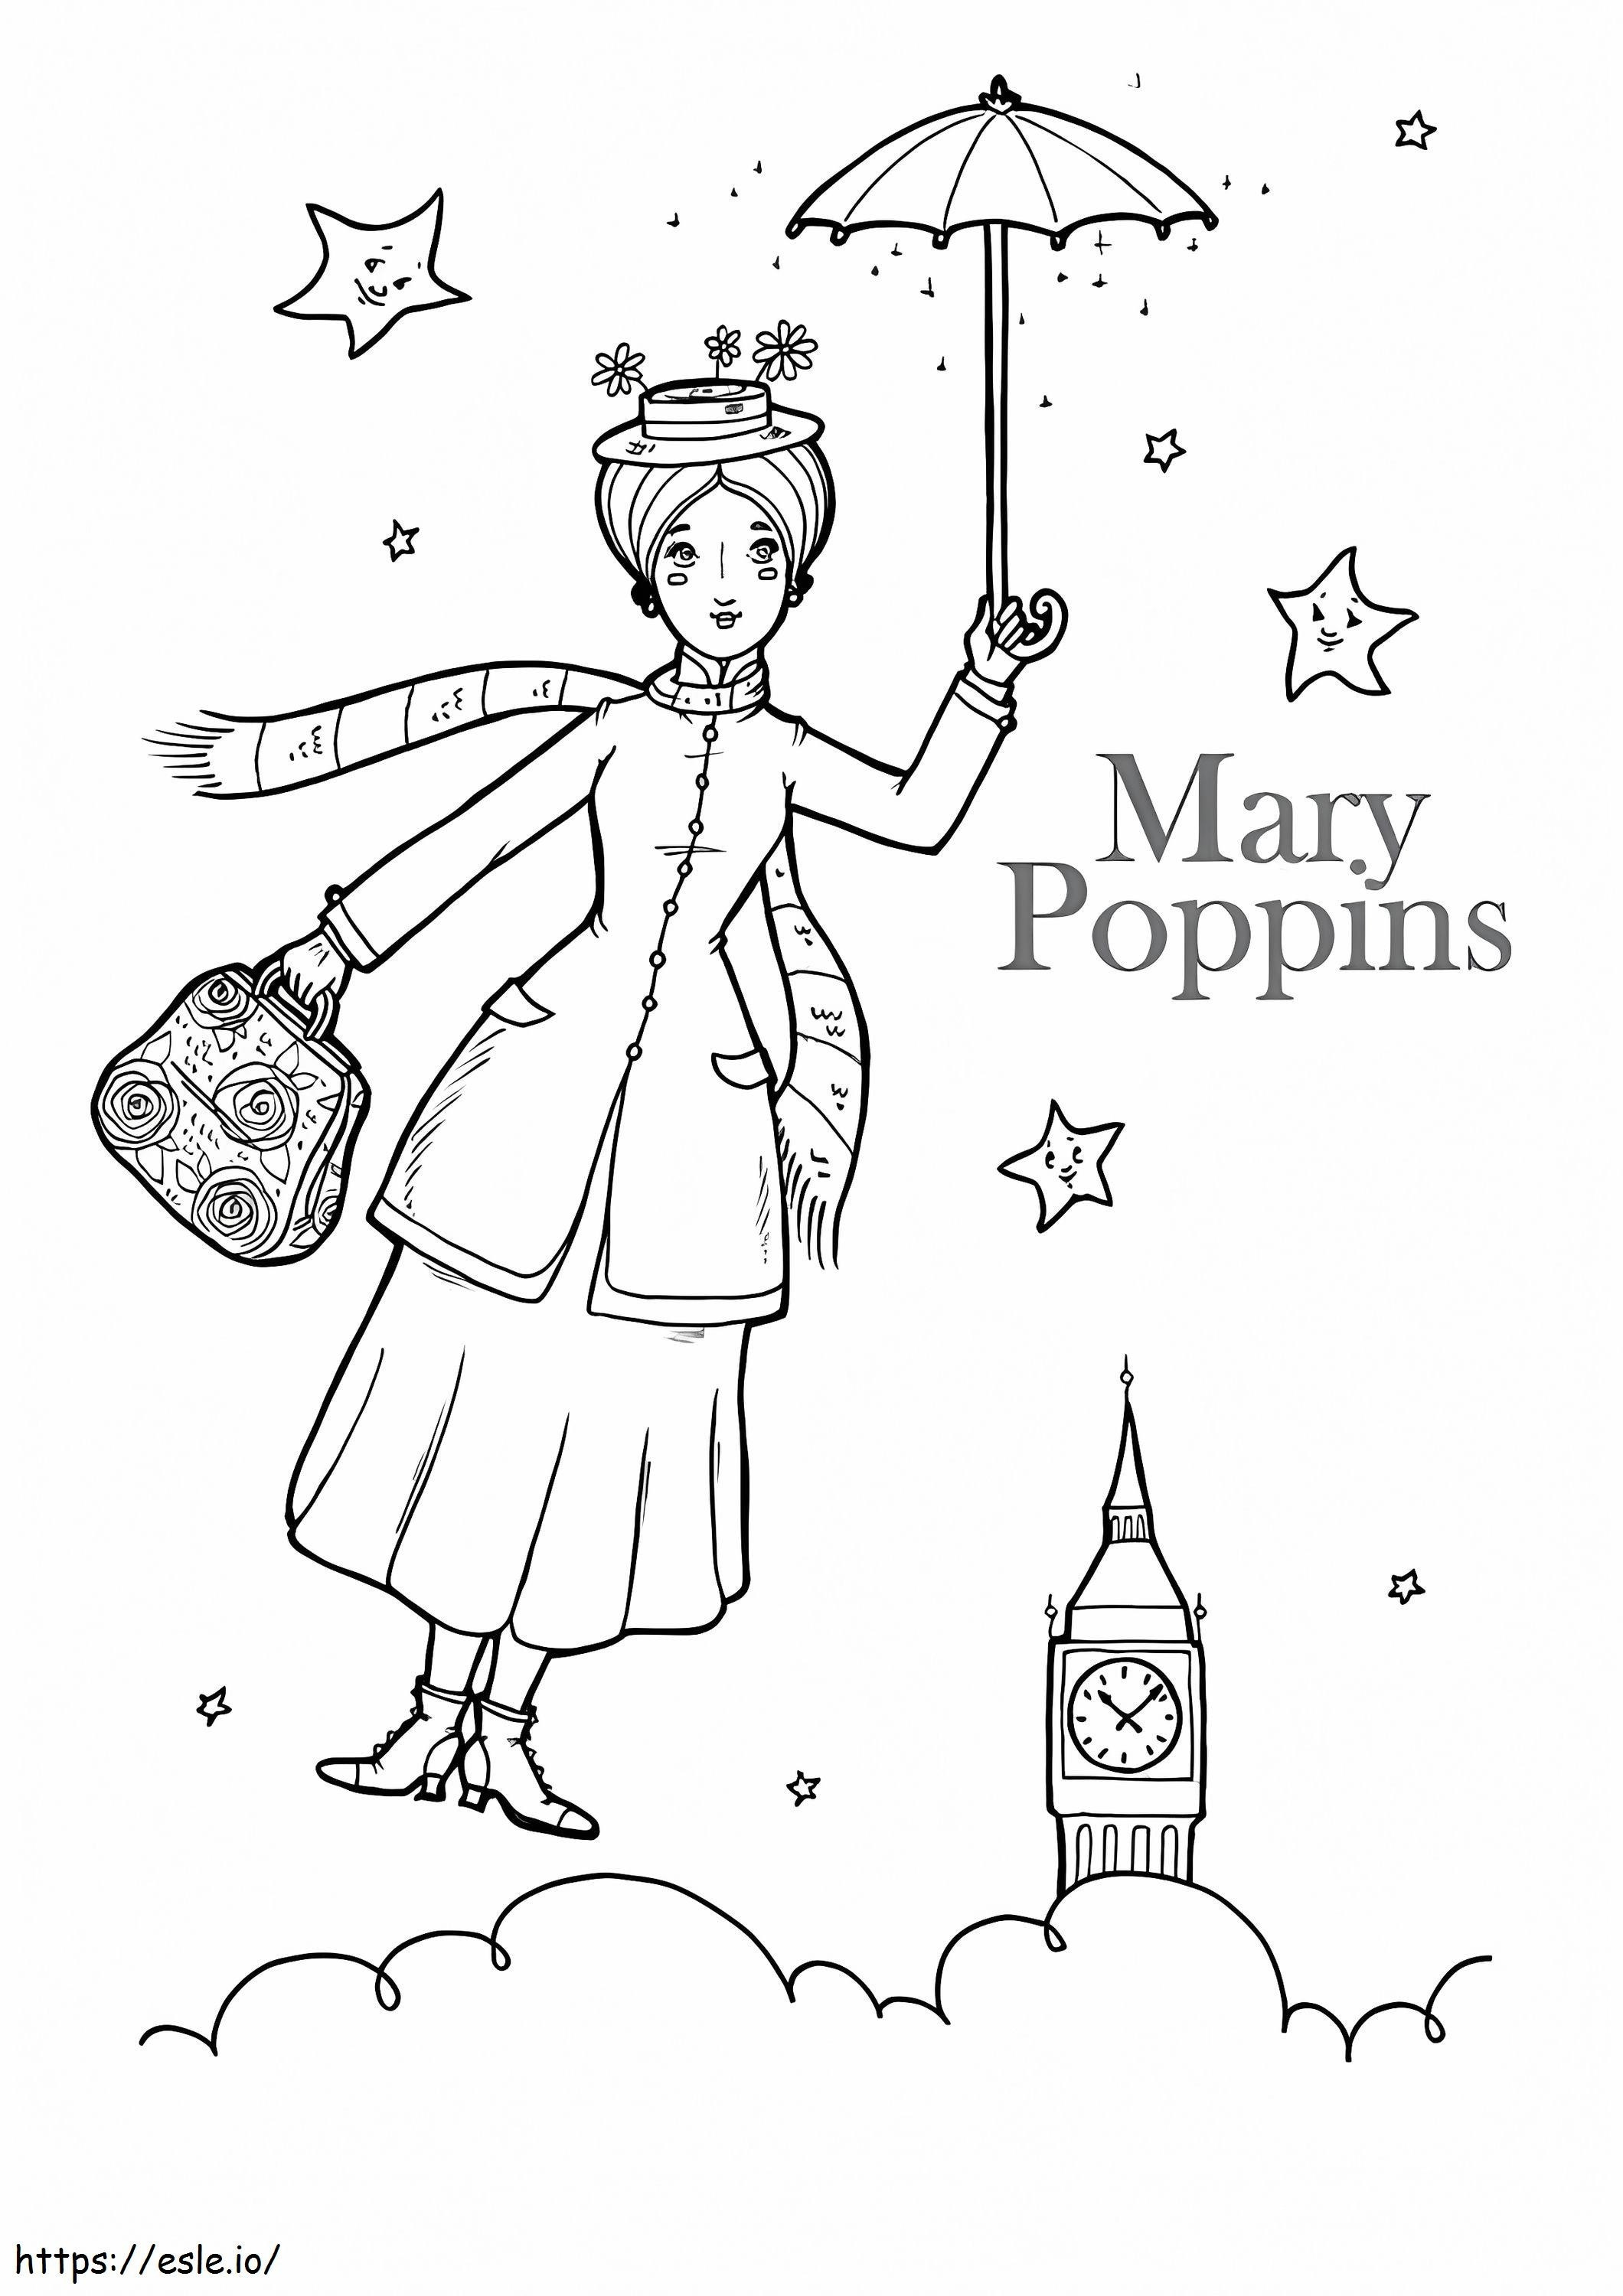 Happy Mary Poppins coloring page